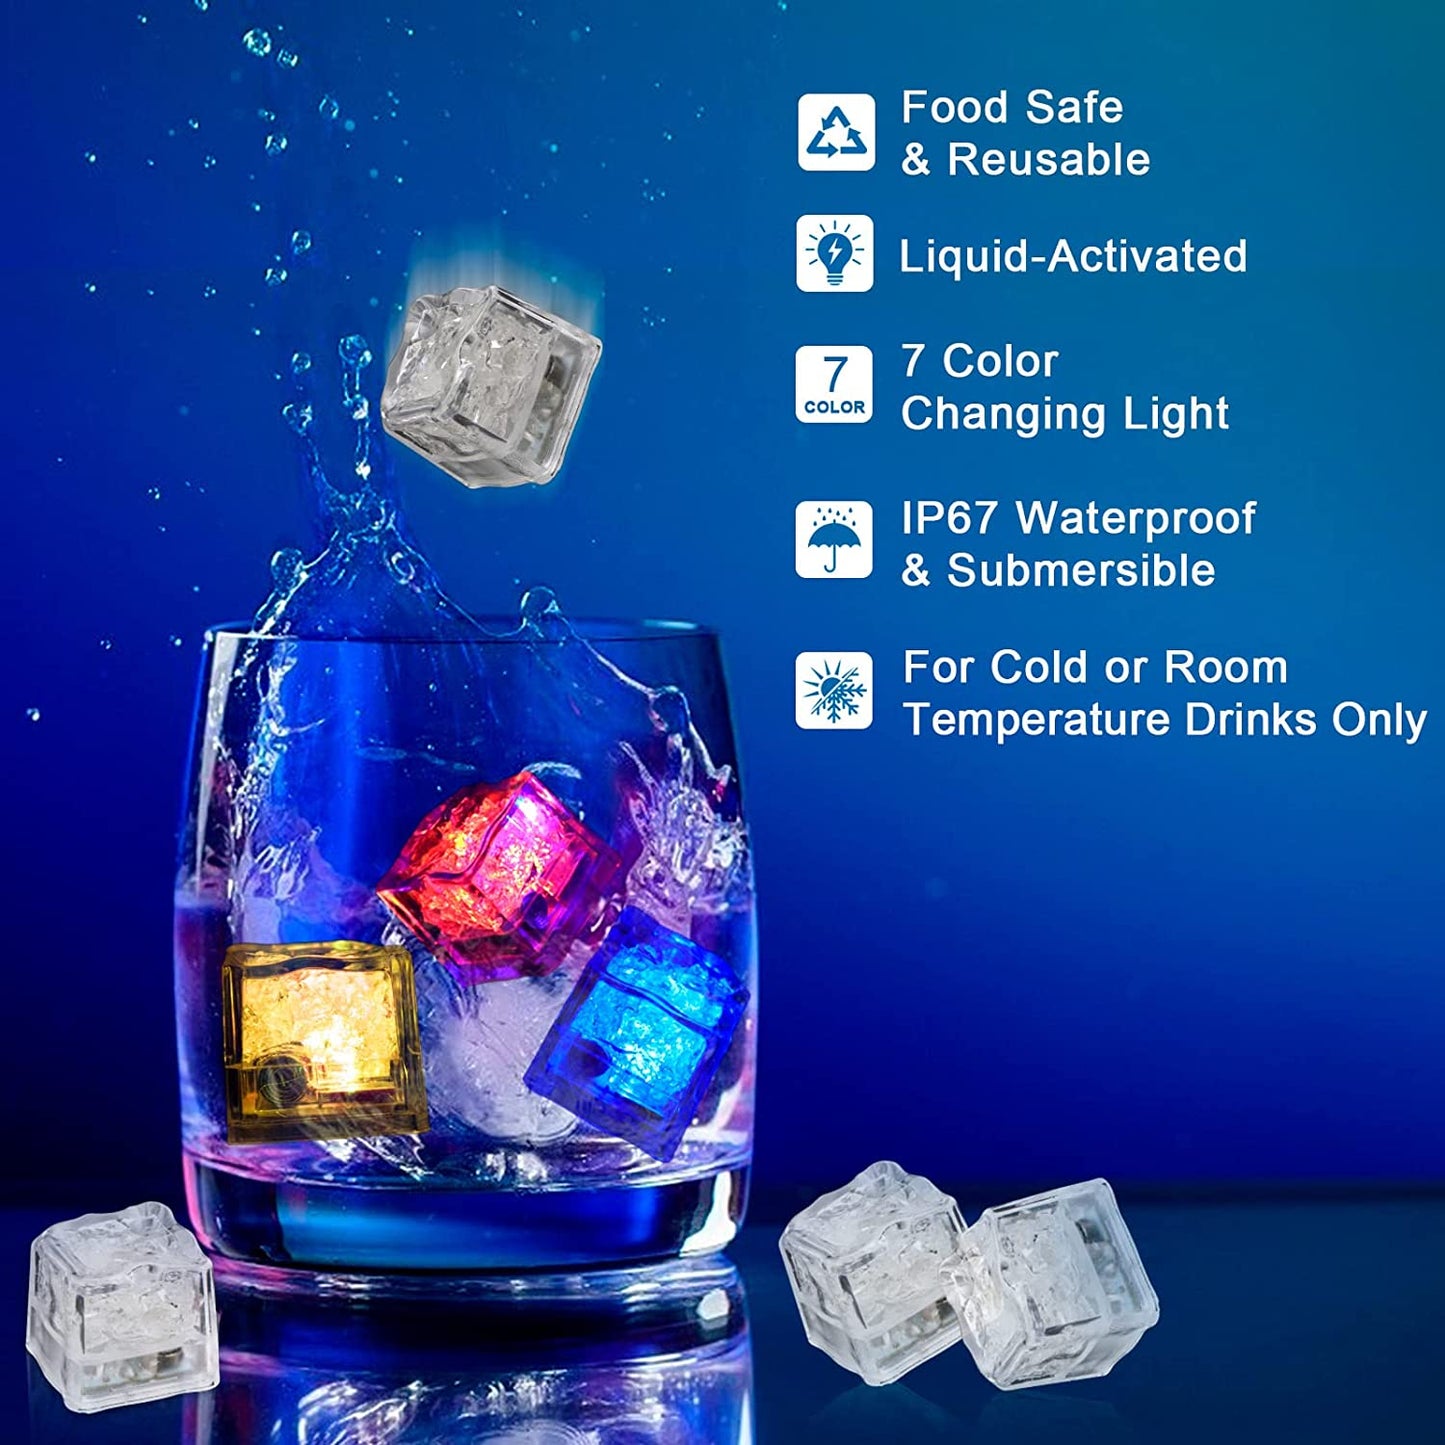 Light up Ice Cubes Bulk, 200 PCS Multi Color Led Ice Cubes for Drinks with Changing Lights, IP67 Waterproof Reusable Glowing Flashing Ice Cube for Club Bar Party Wedding Decor